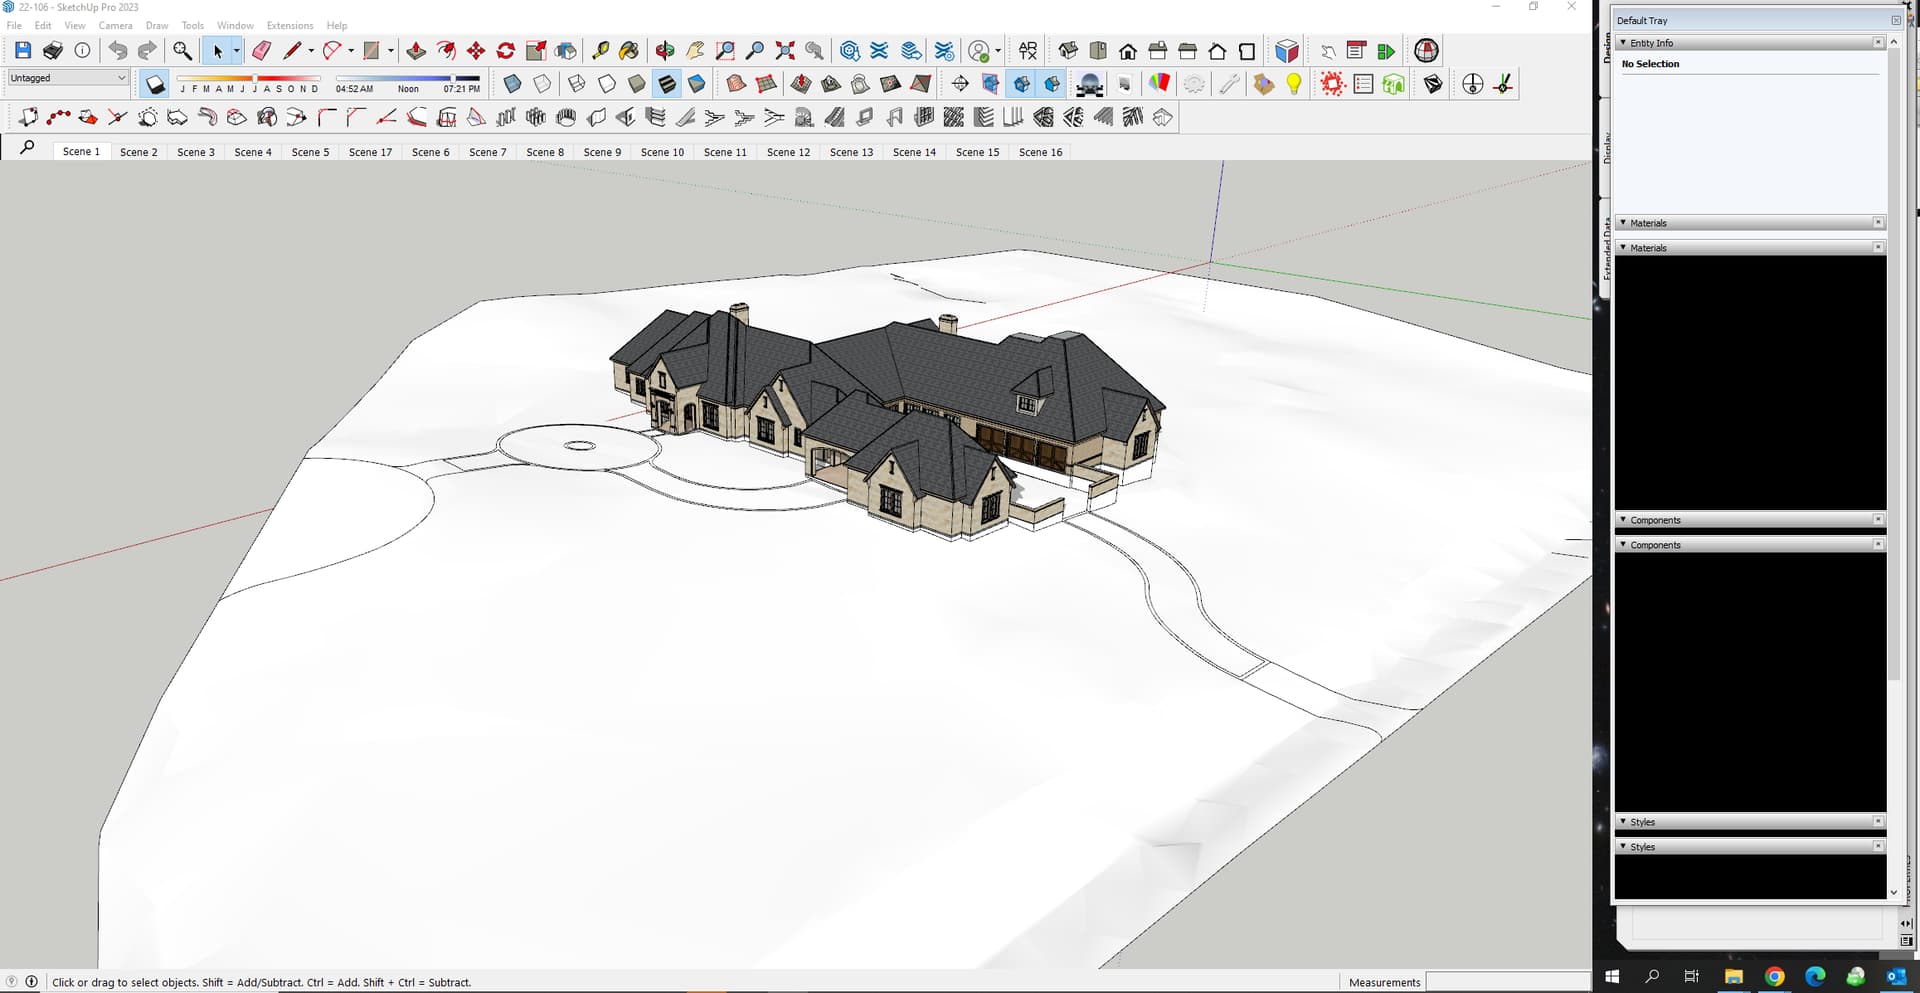 3D house design on SketchUp Pro 2023 displayed on a computer screen.